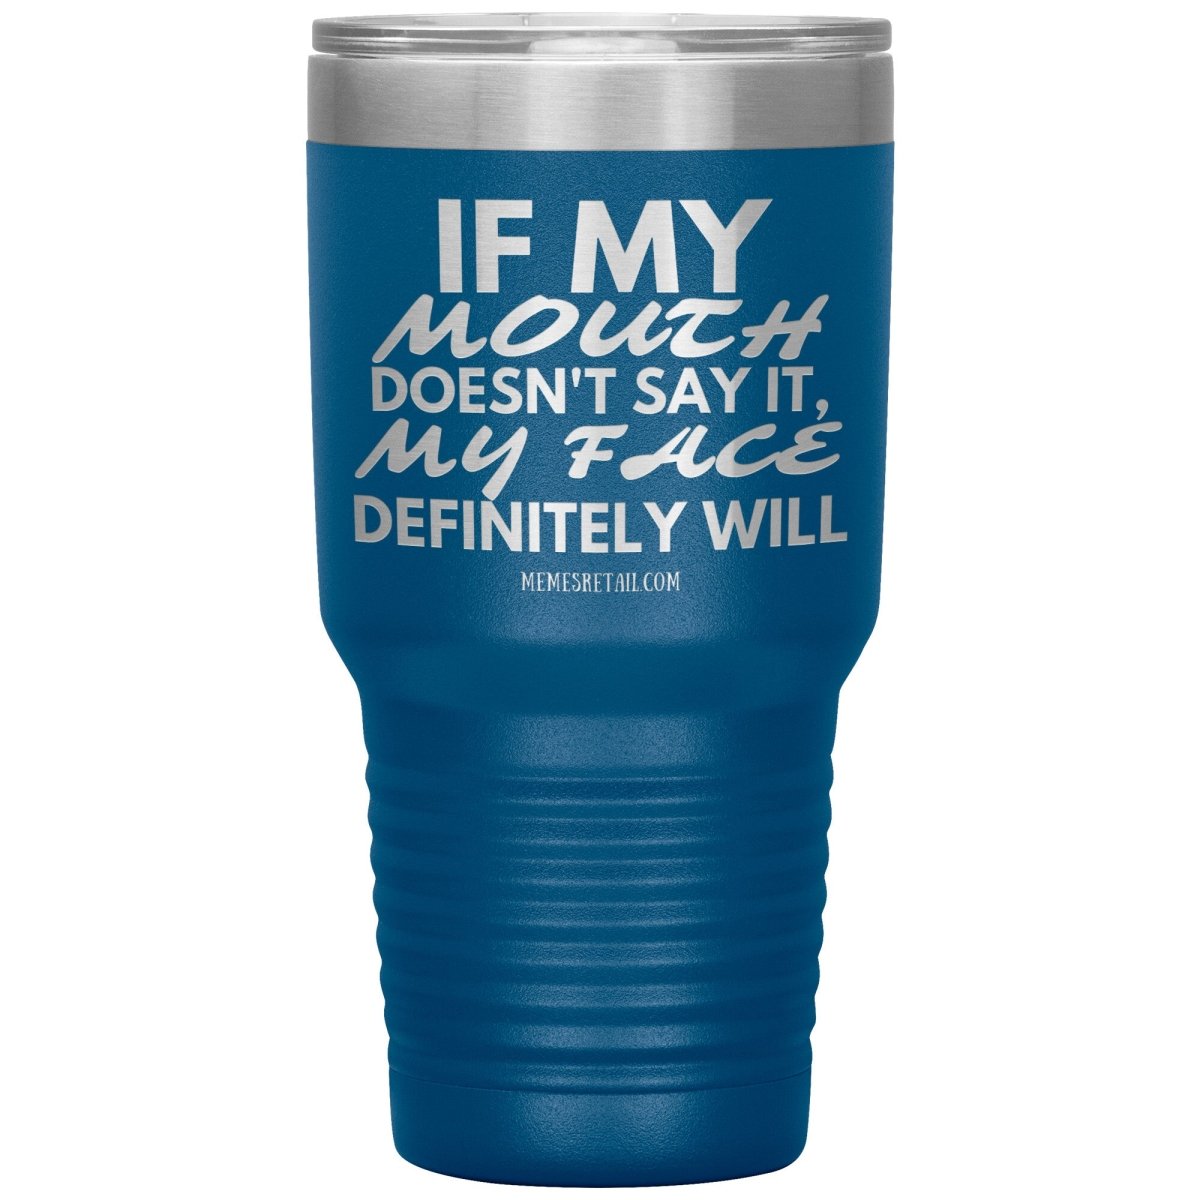 If my mouth doesn't say it, my face definitely will Tumblers, 30oz Insulated Tumbler / Blue - MemesRetail.com